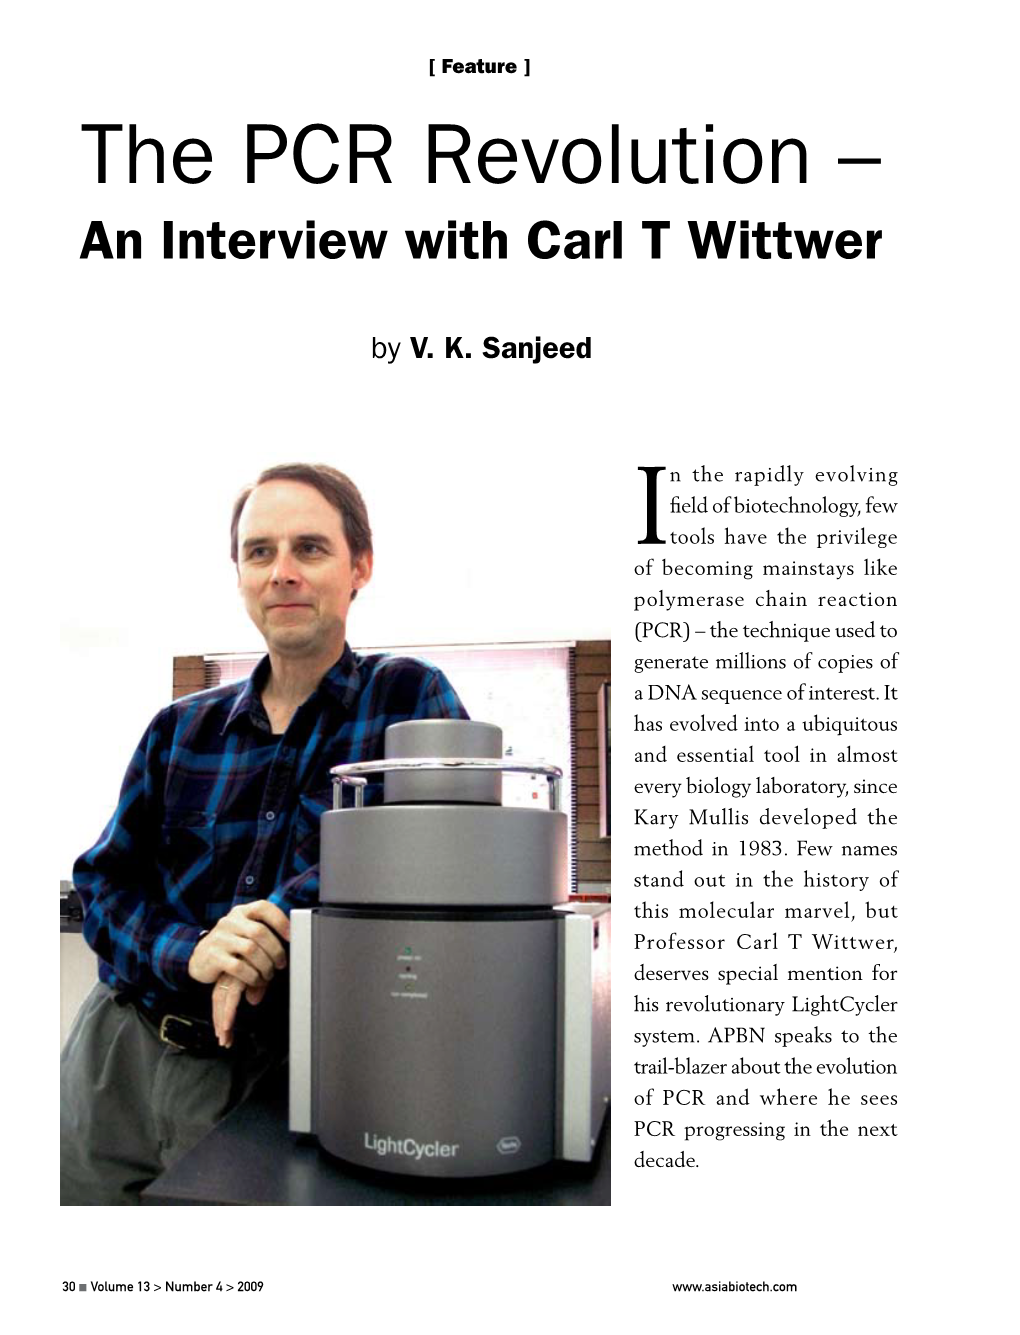 The PCR Revolution – an Interview with Carl T Wittwer